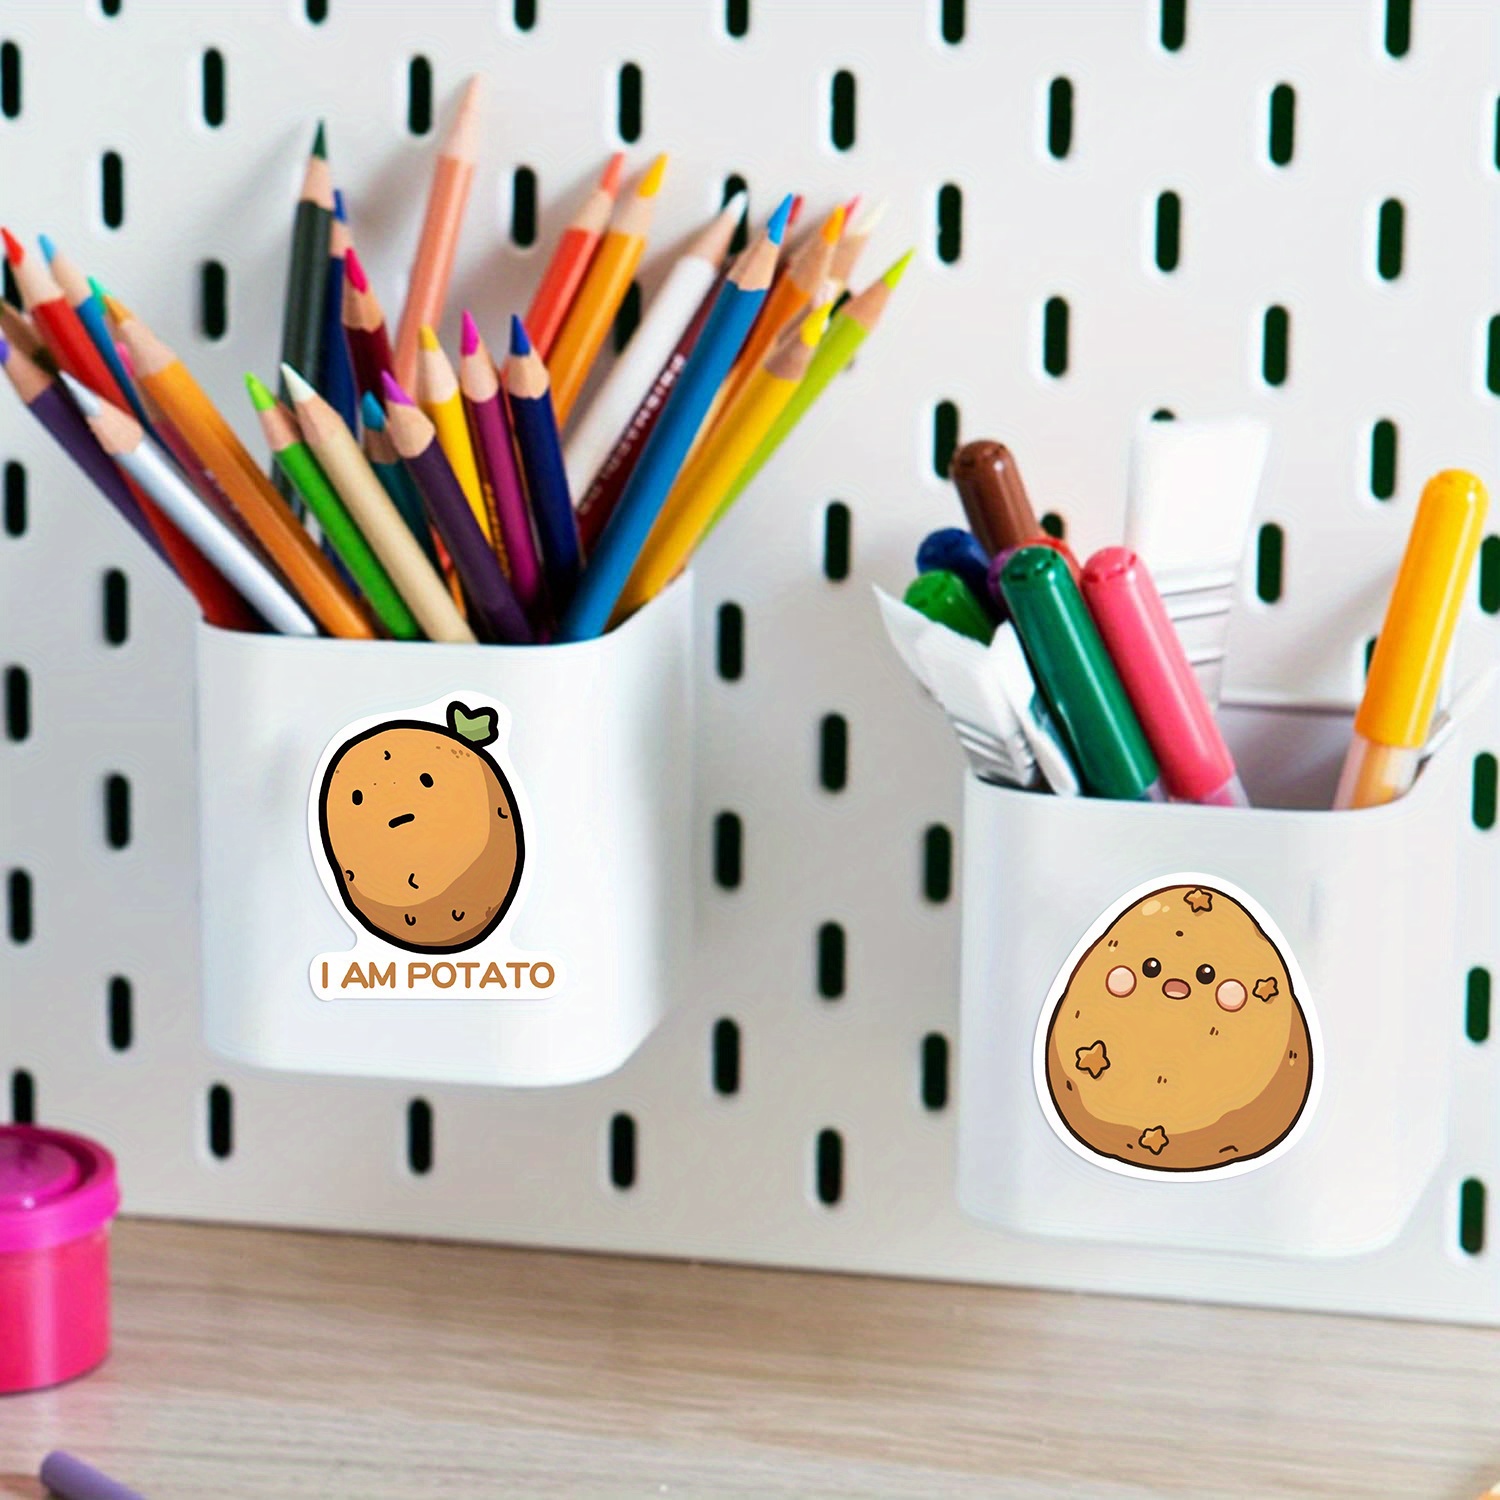 11 Recipe Organizers That Are Cute and Clever